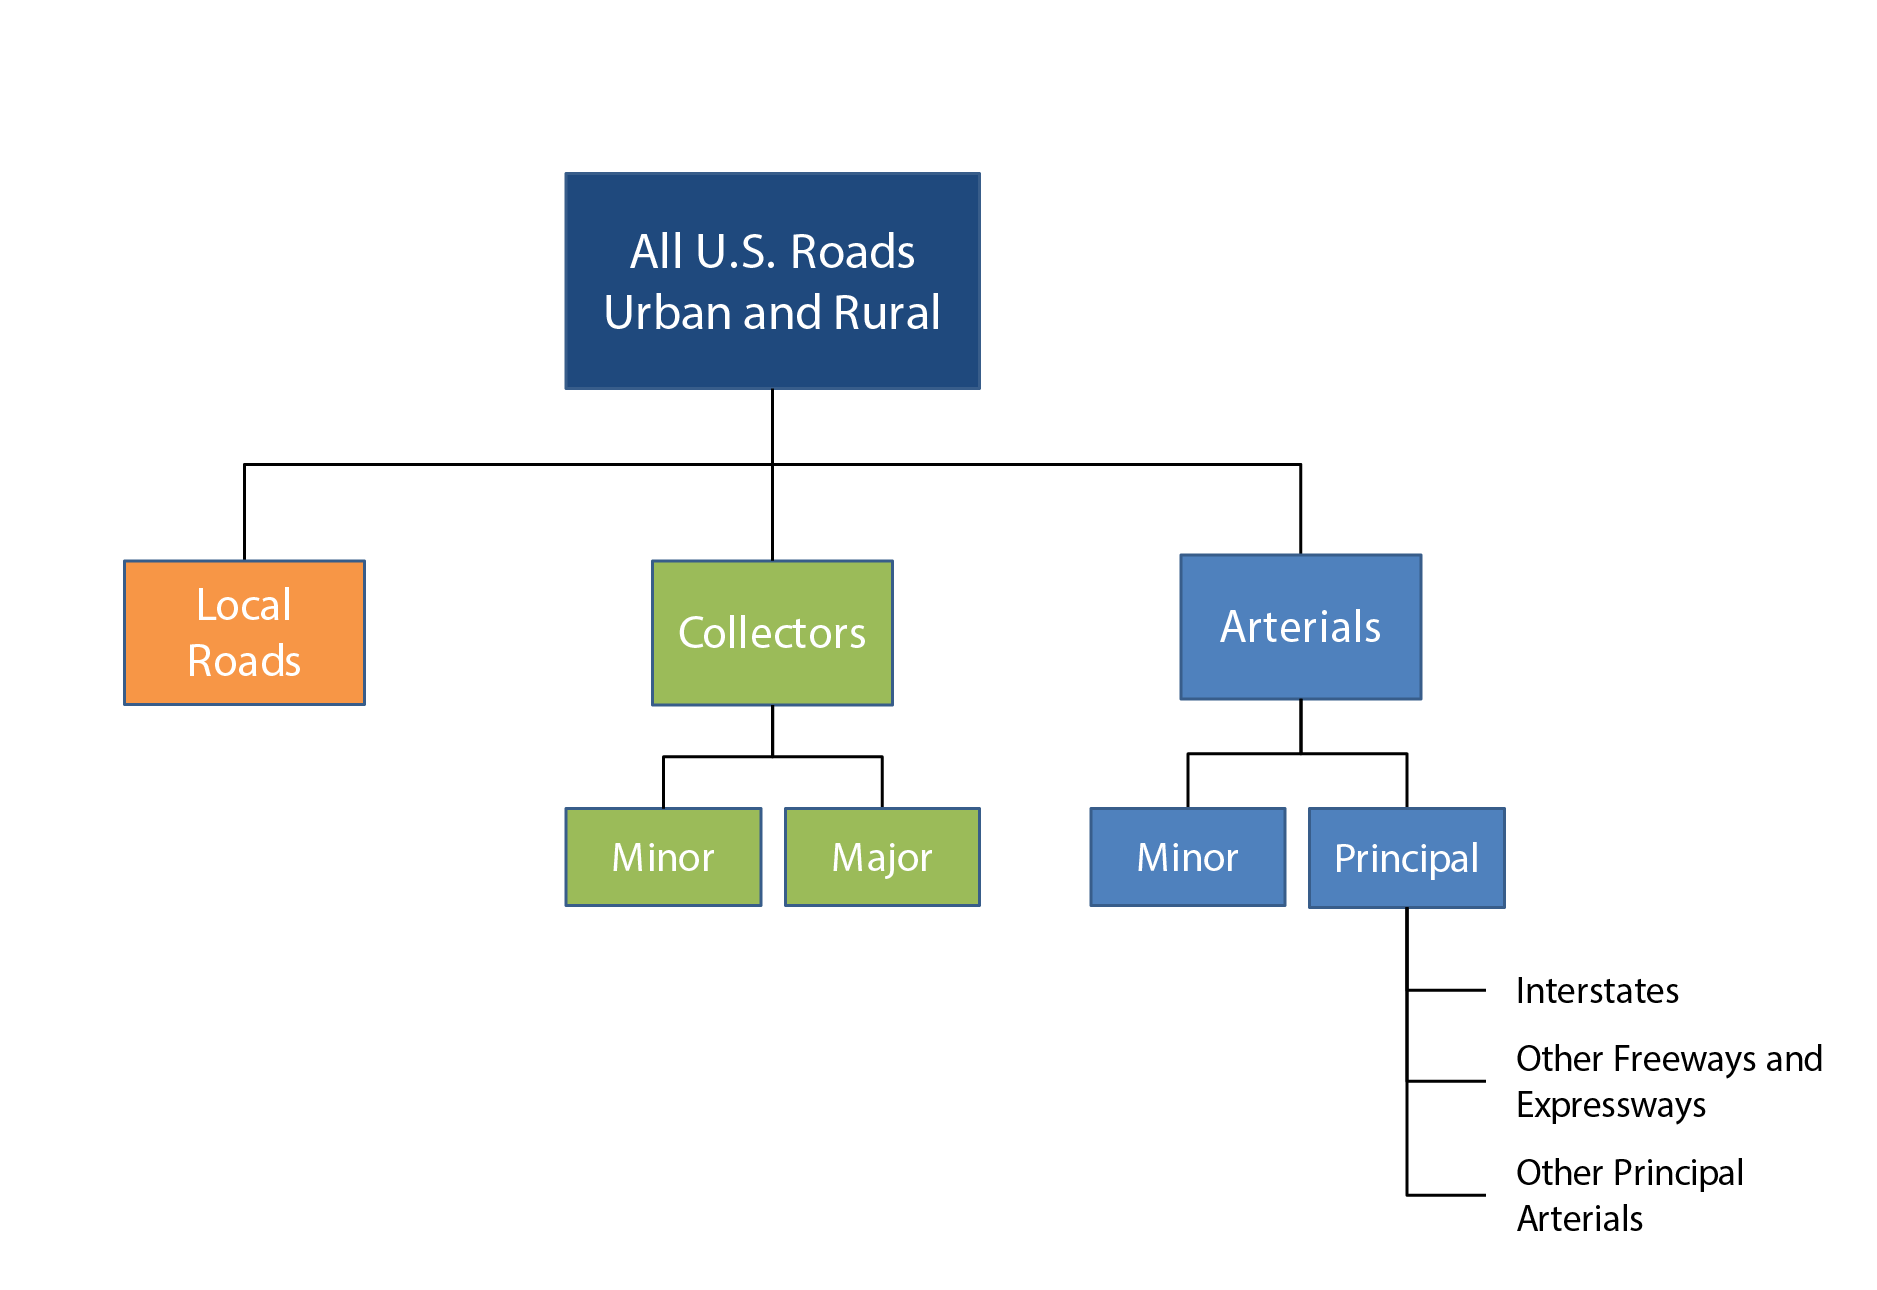 This flowchart shows FHWA functional classifications with subcategories under U.S. roads, urban and rural. Subcategories include Local; Collectors (broken into Major and Minor); and Arterials (broken into Minor and Principal-that includes Interstates, Other Freeways and Expressways, and Other Principal Arterials). Source: FHWA Functional Classification Guidelines.  